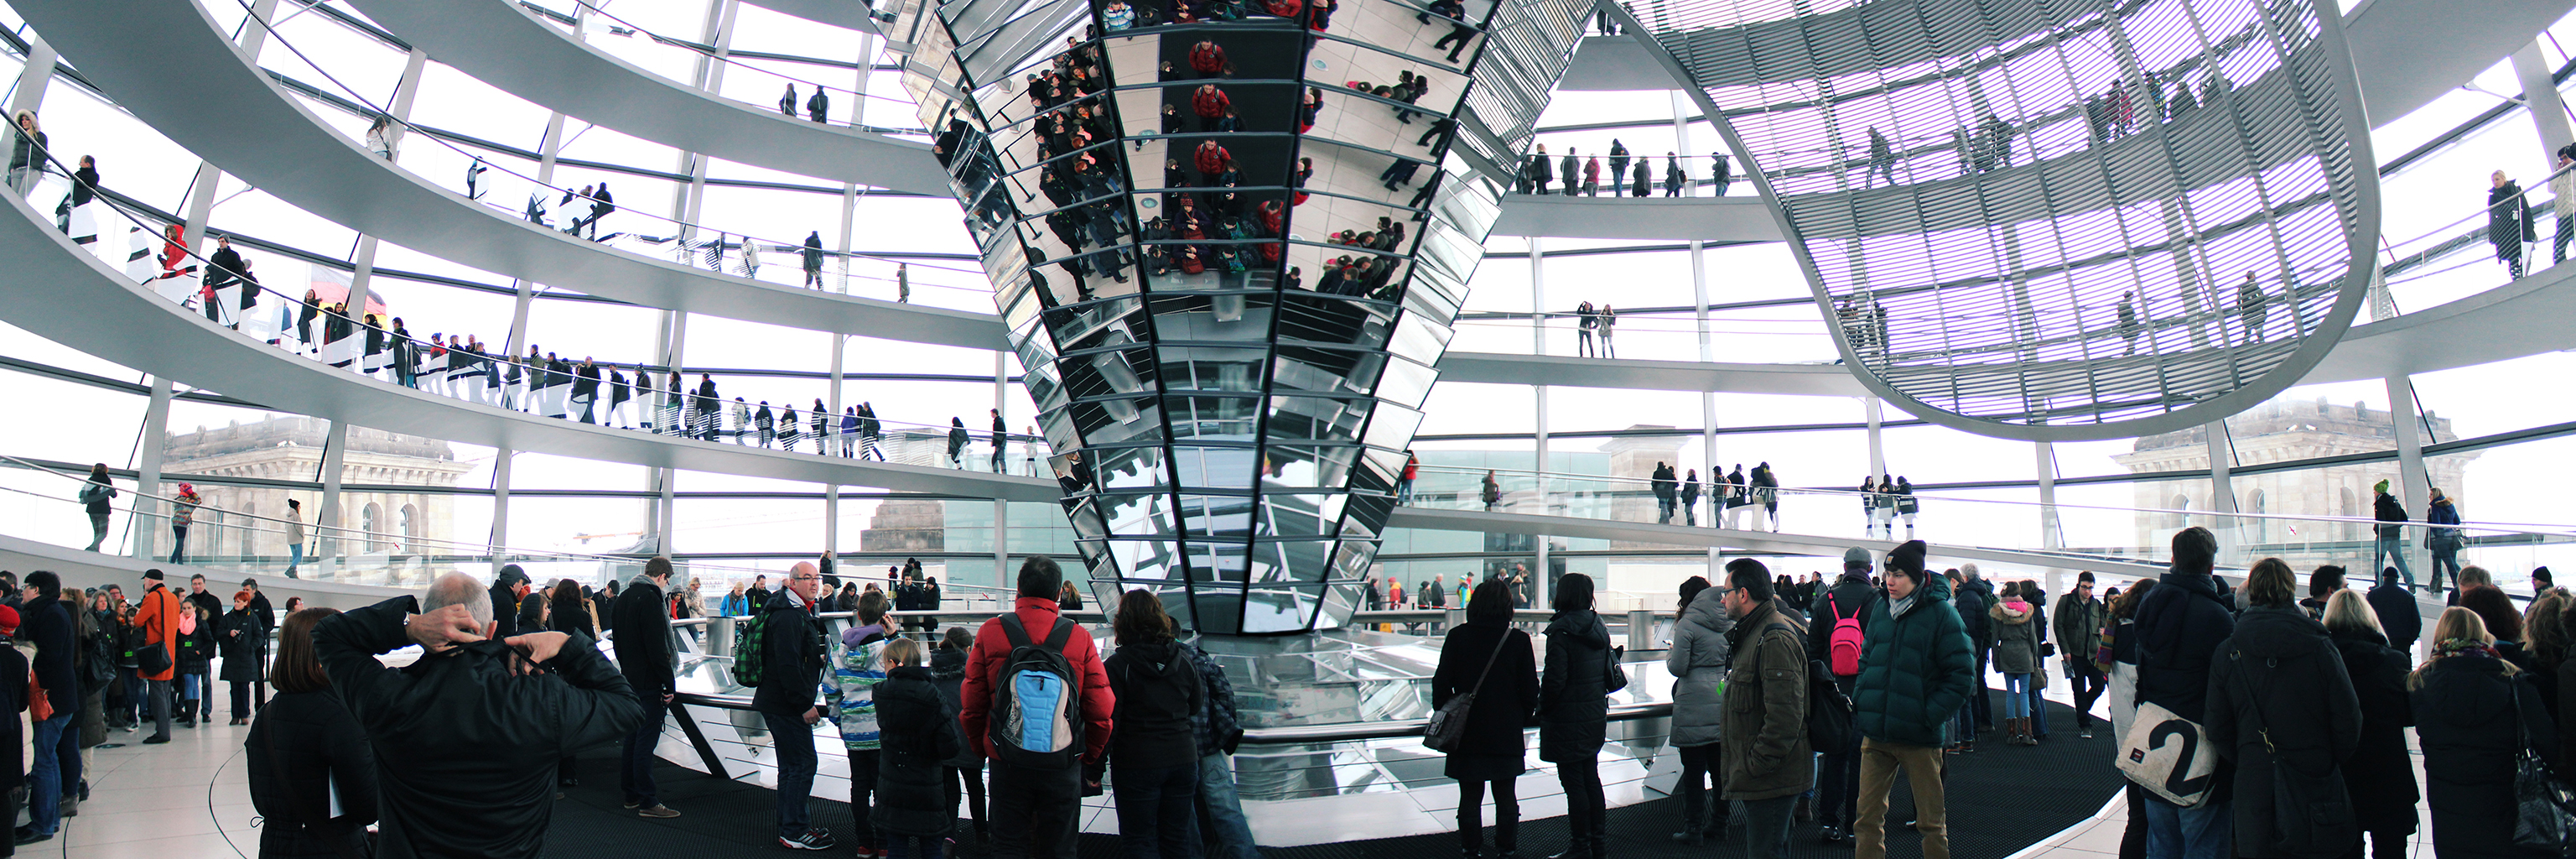 People explore the Reichstag Building in Berlin, Germany.